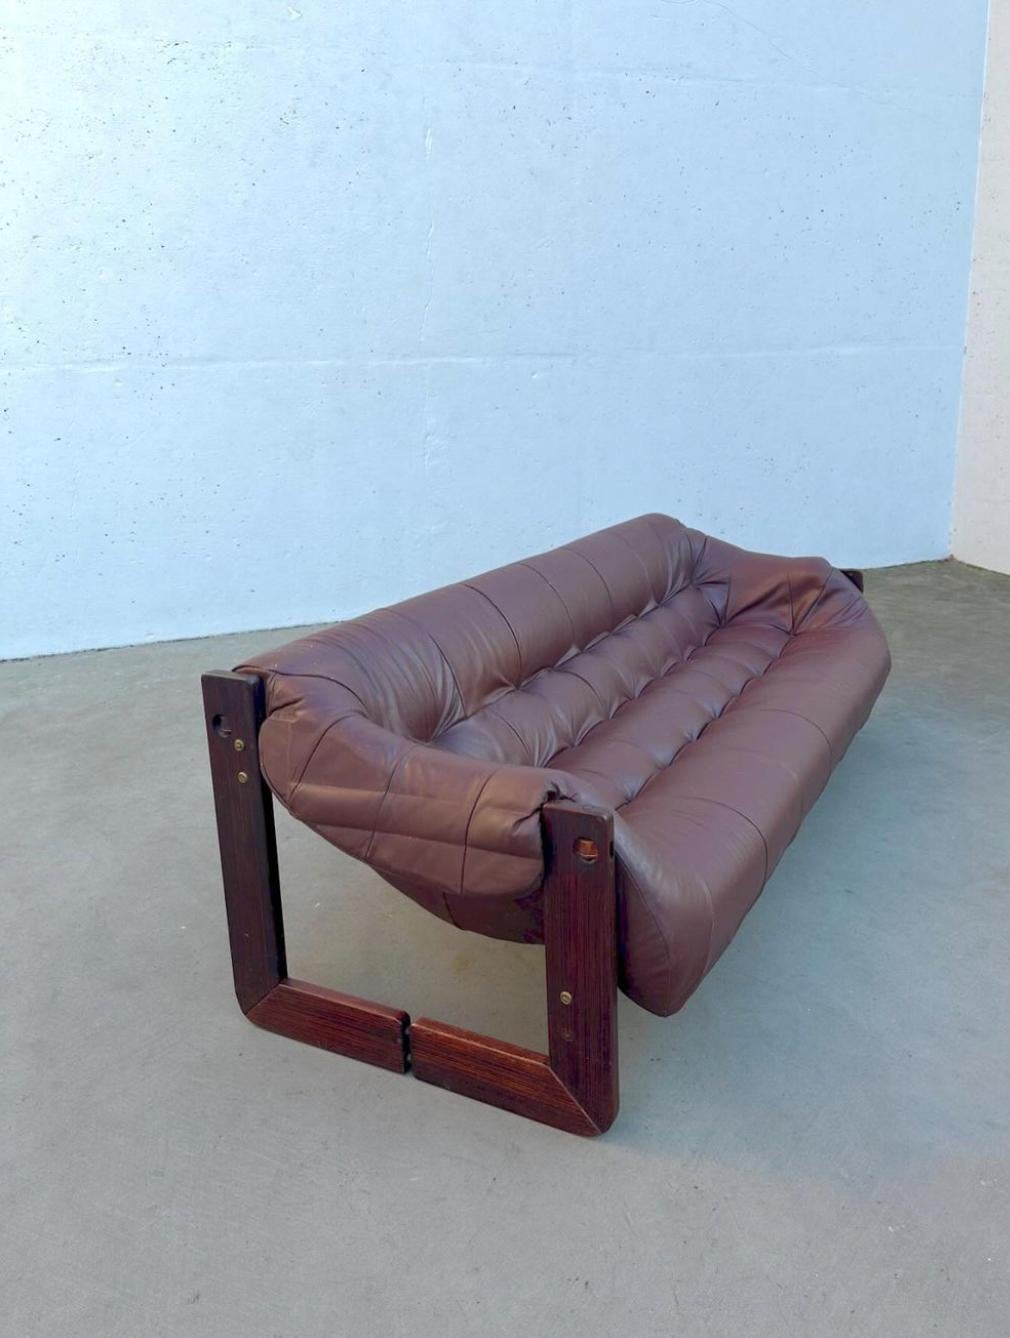 Percival Lafer ‘MP-97’ Rosewood and Leather Sofa In Good Condition For Sale In Weehawken, NJ